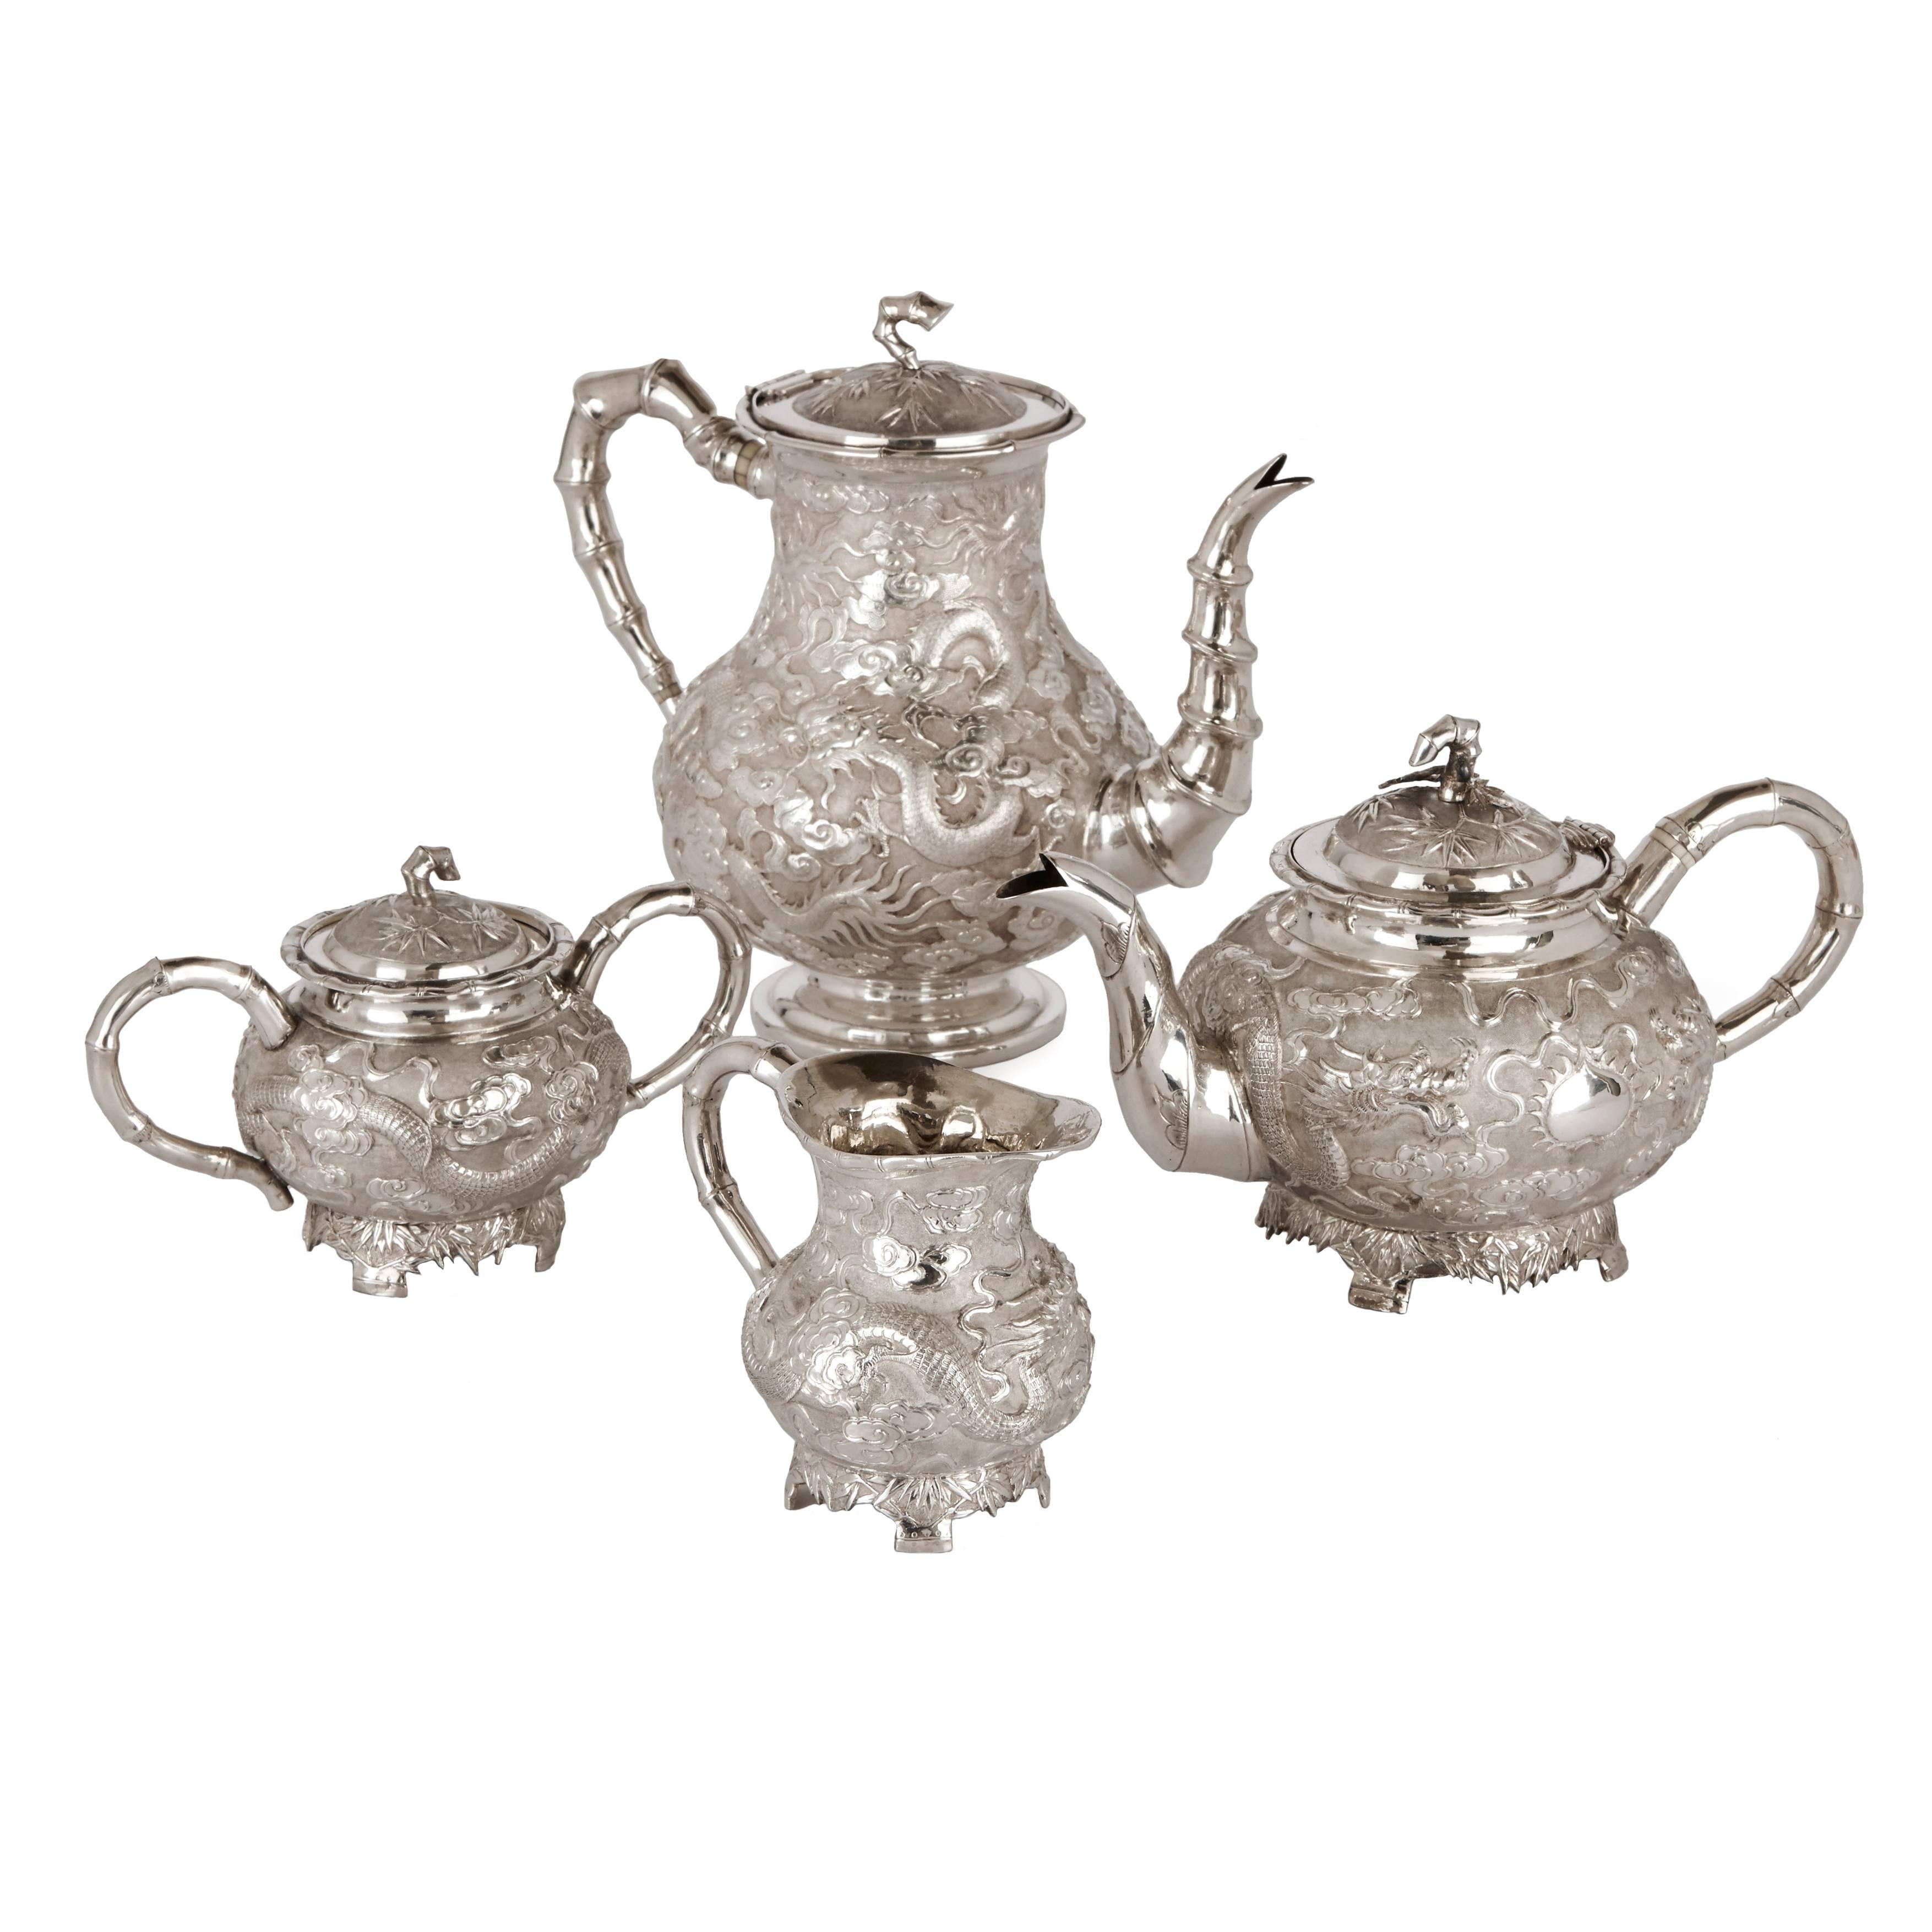 Fine Qing Dynasty Four Piece Silver Coffee and Tea Service by K.W